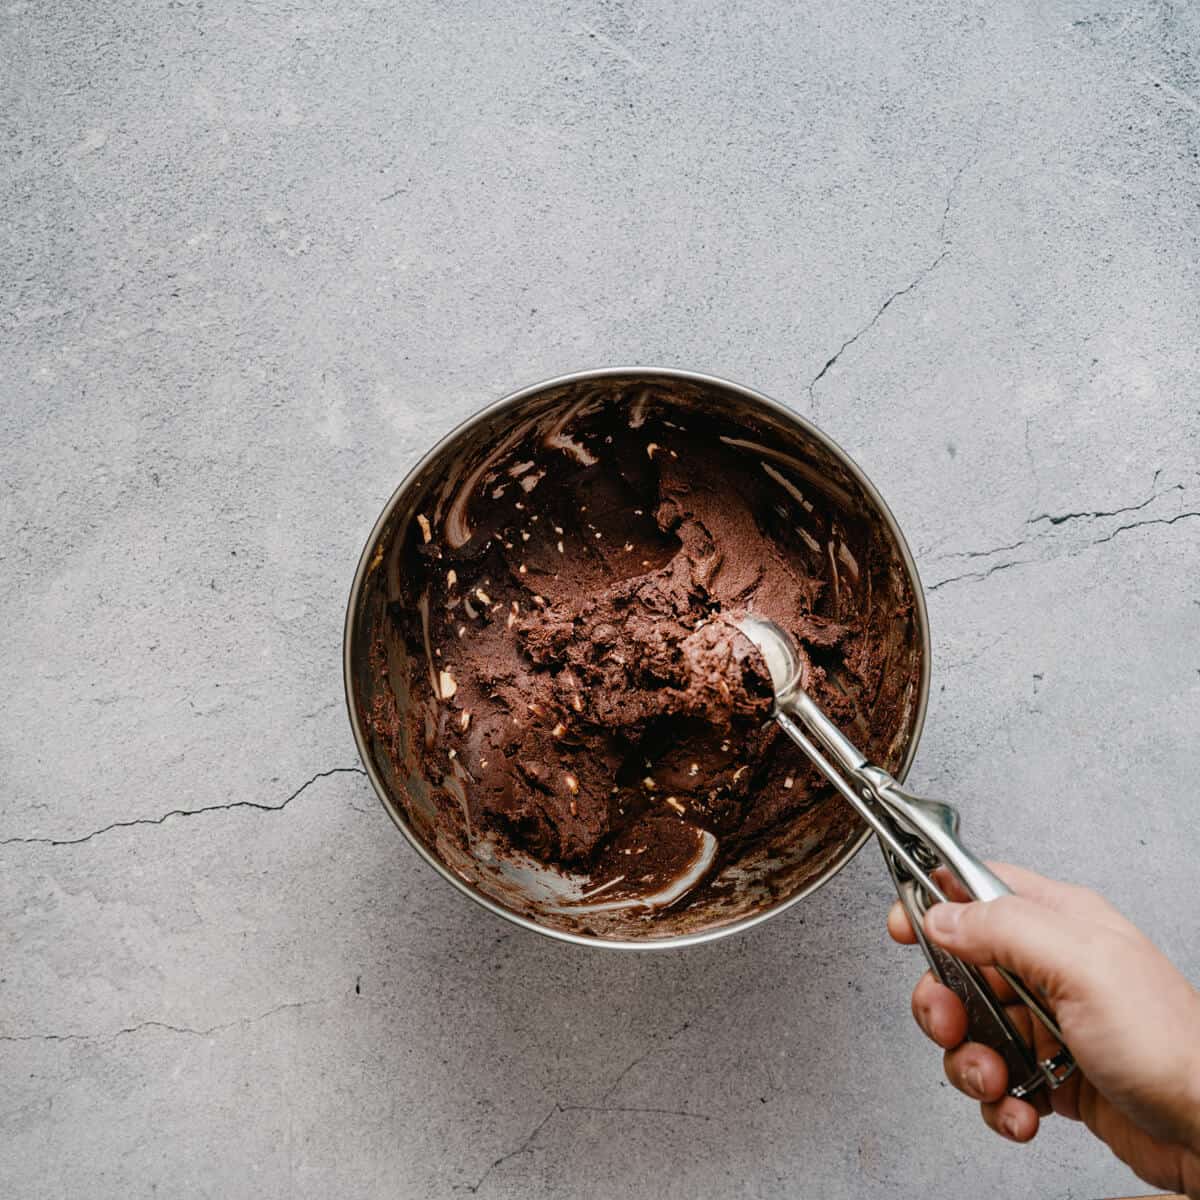 a cookie scoop scooping out chocolate cooking dough from a bowl.